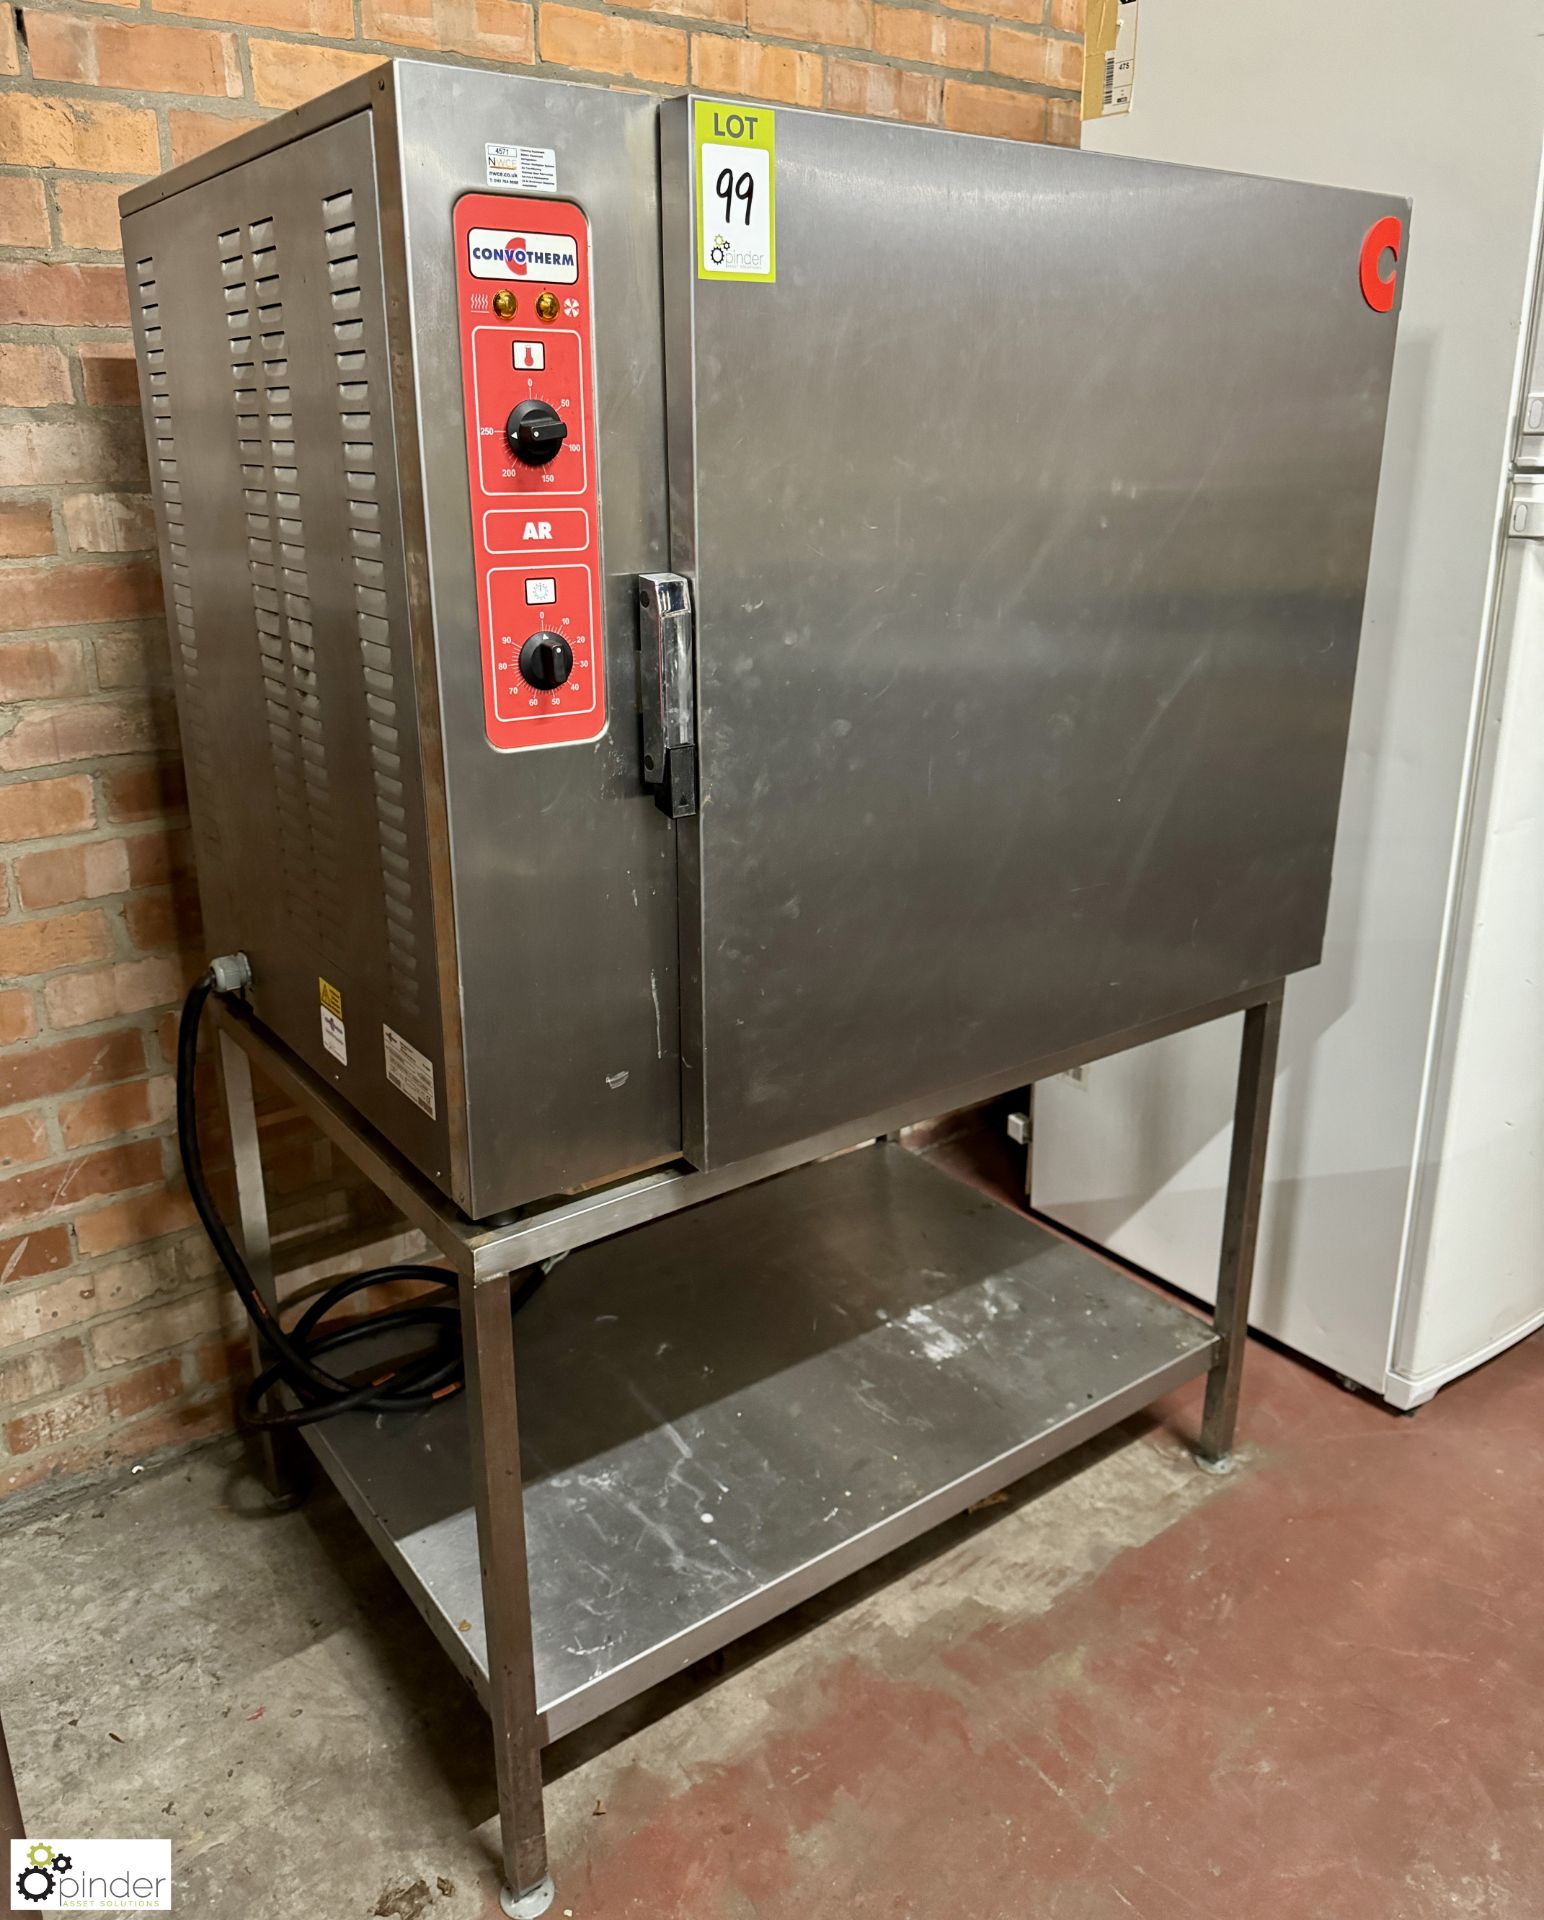 Convotherm AR54 9-deck Fan Oven, 415volts, 1030mm x 720mm x 1500mm, including stand - Image 2 of 6